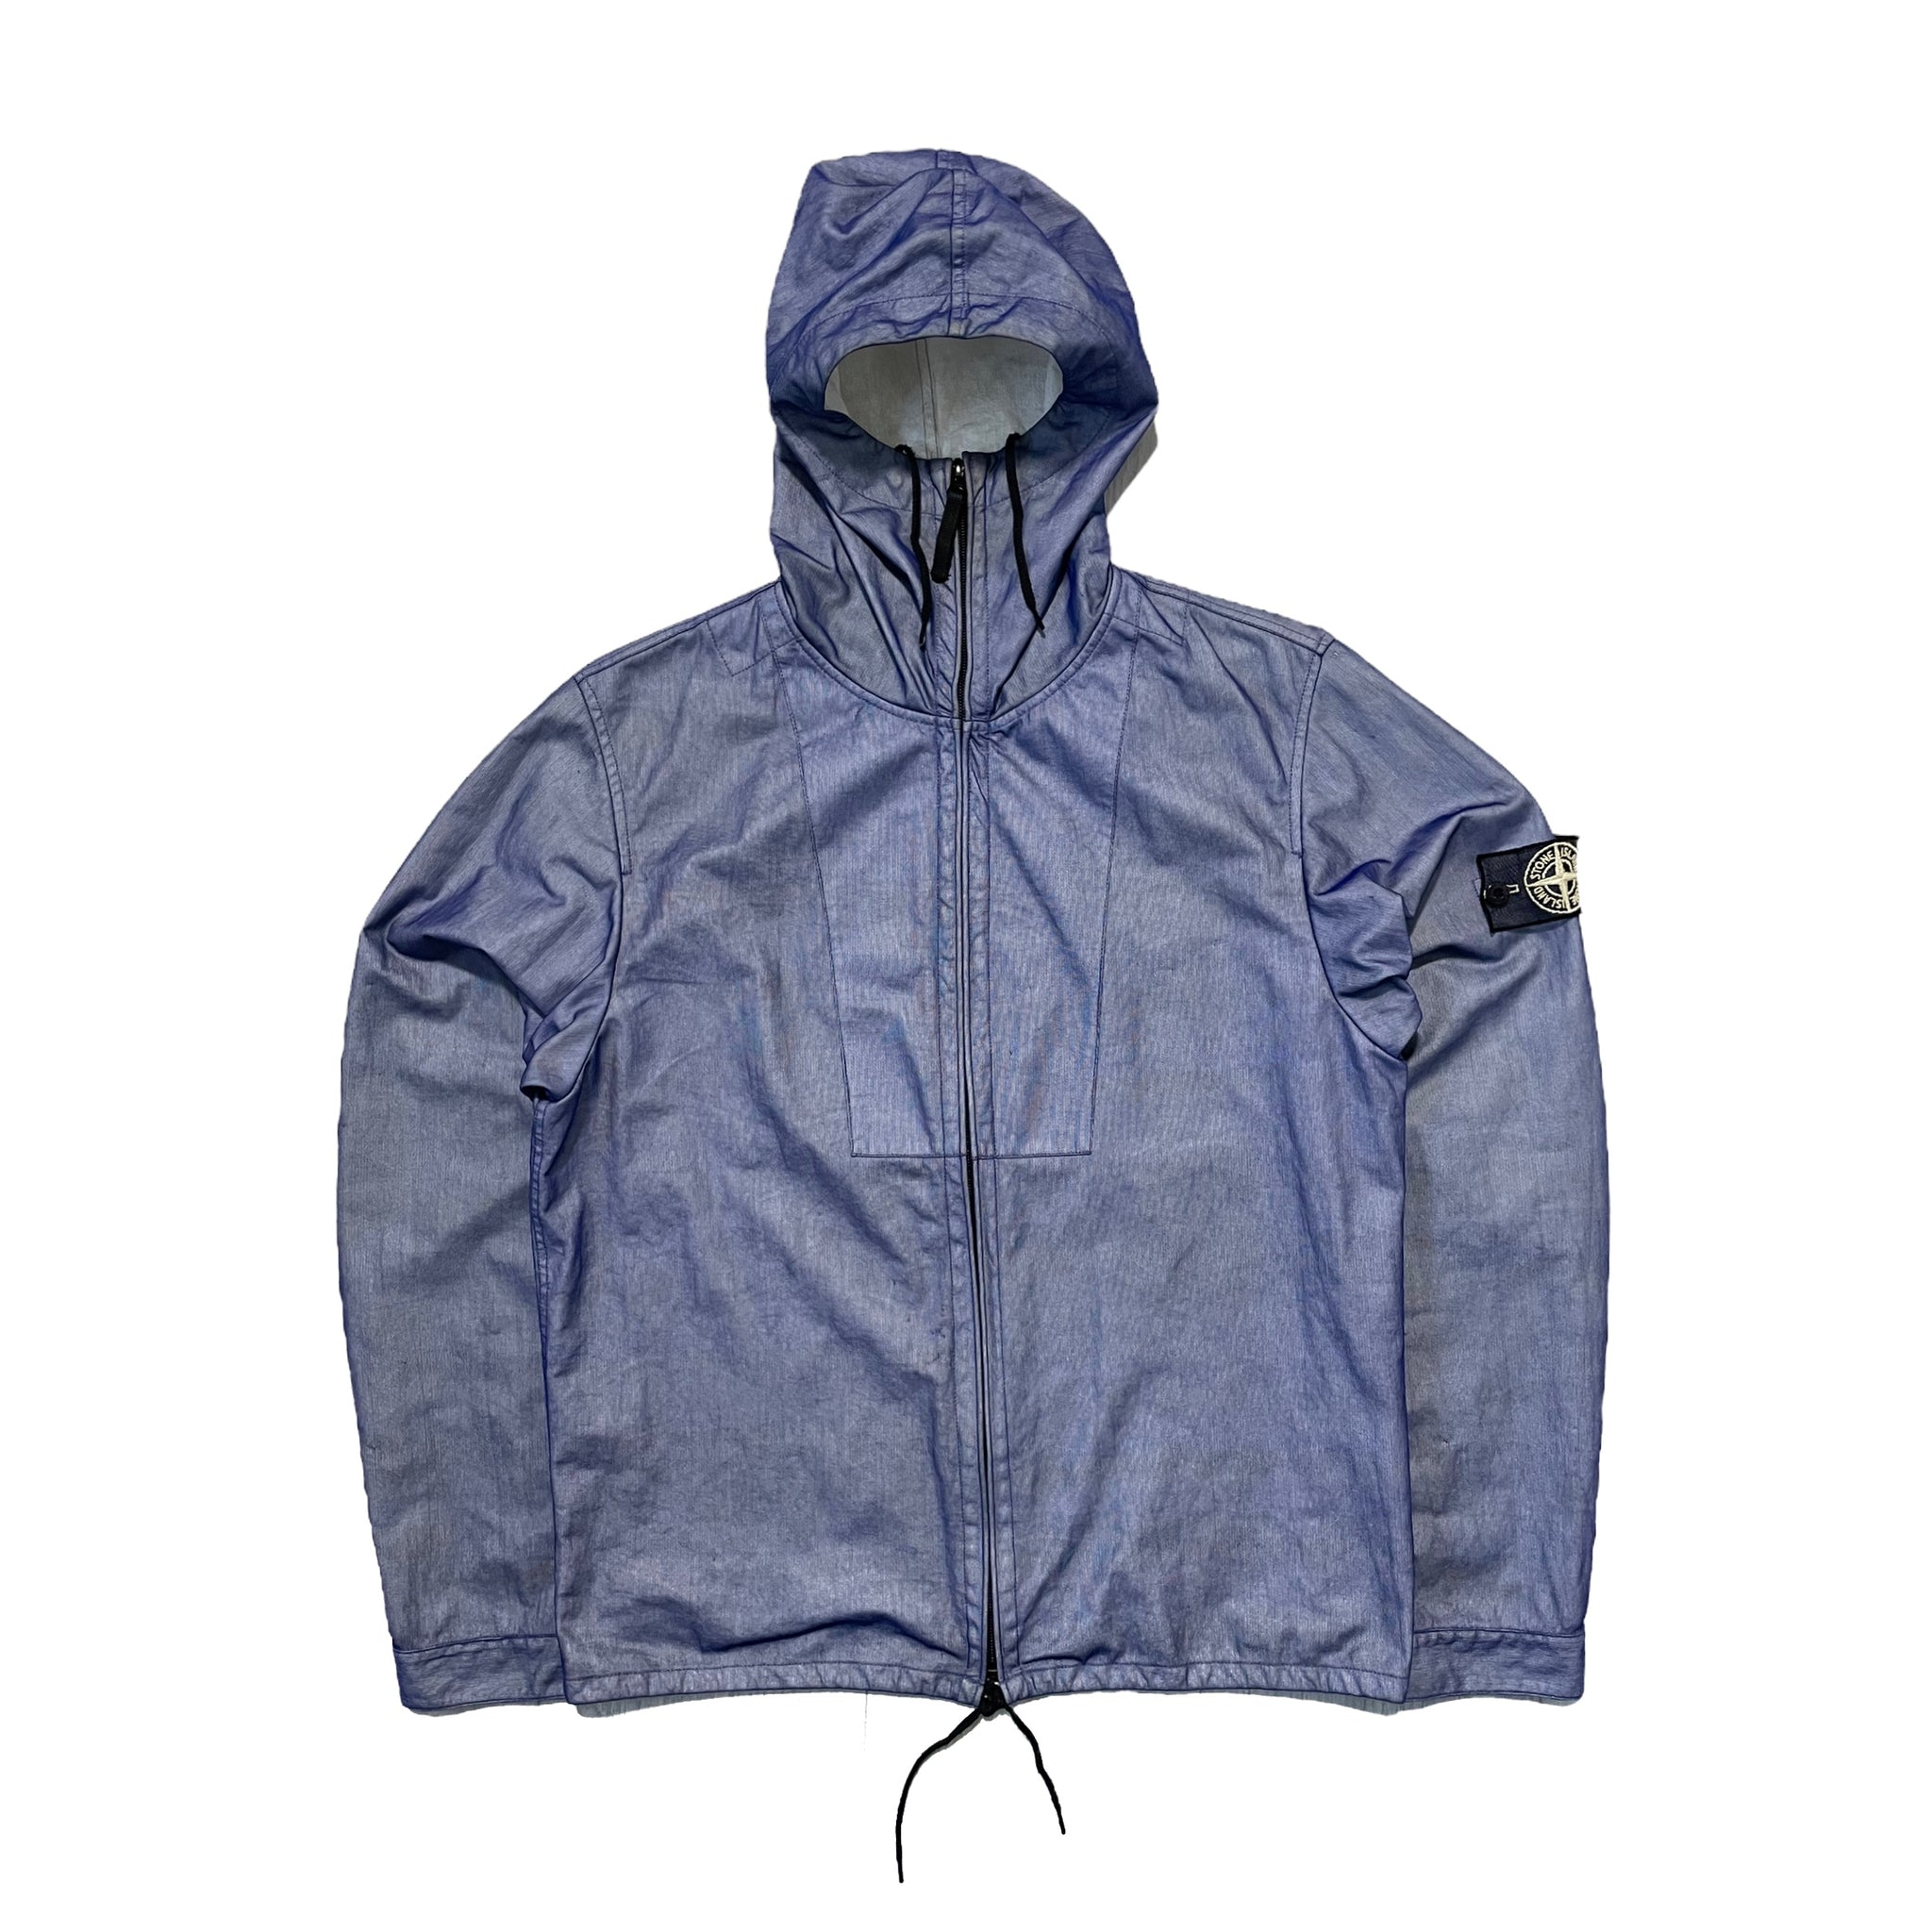 Stone Island Snowflake “In an avalanche no single snowflake feels 